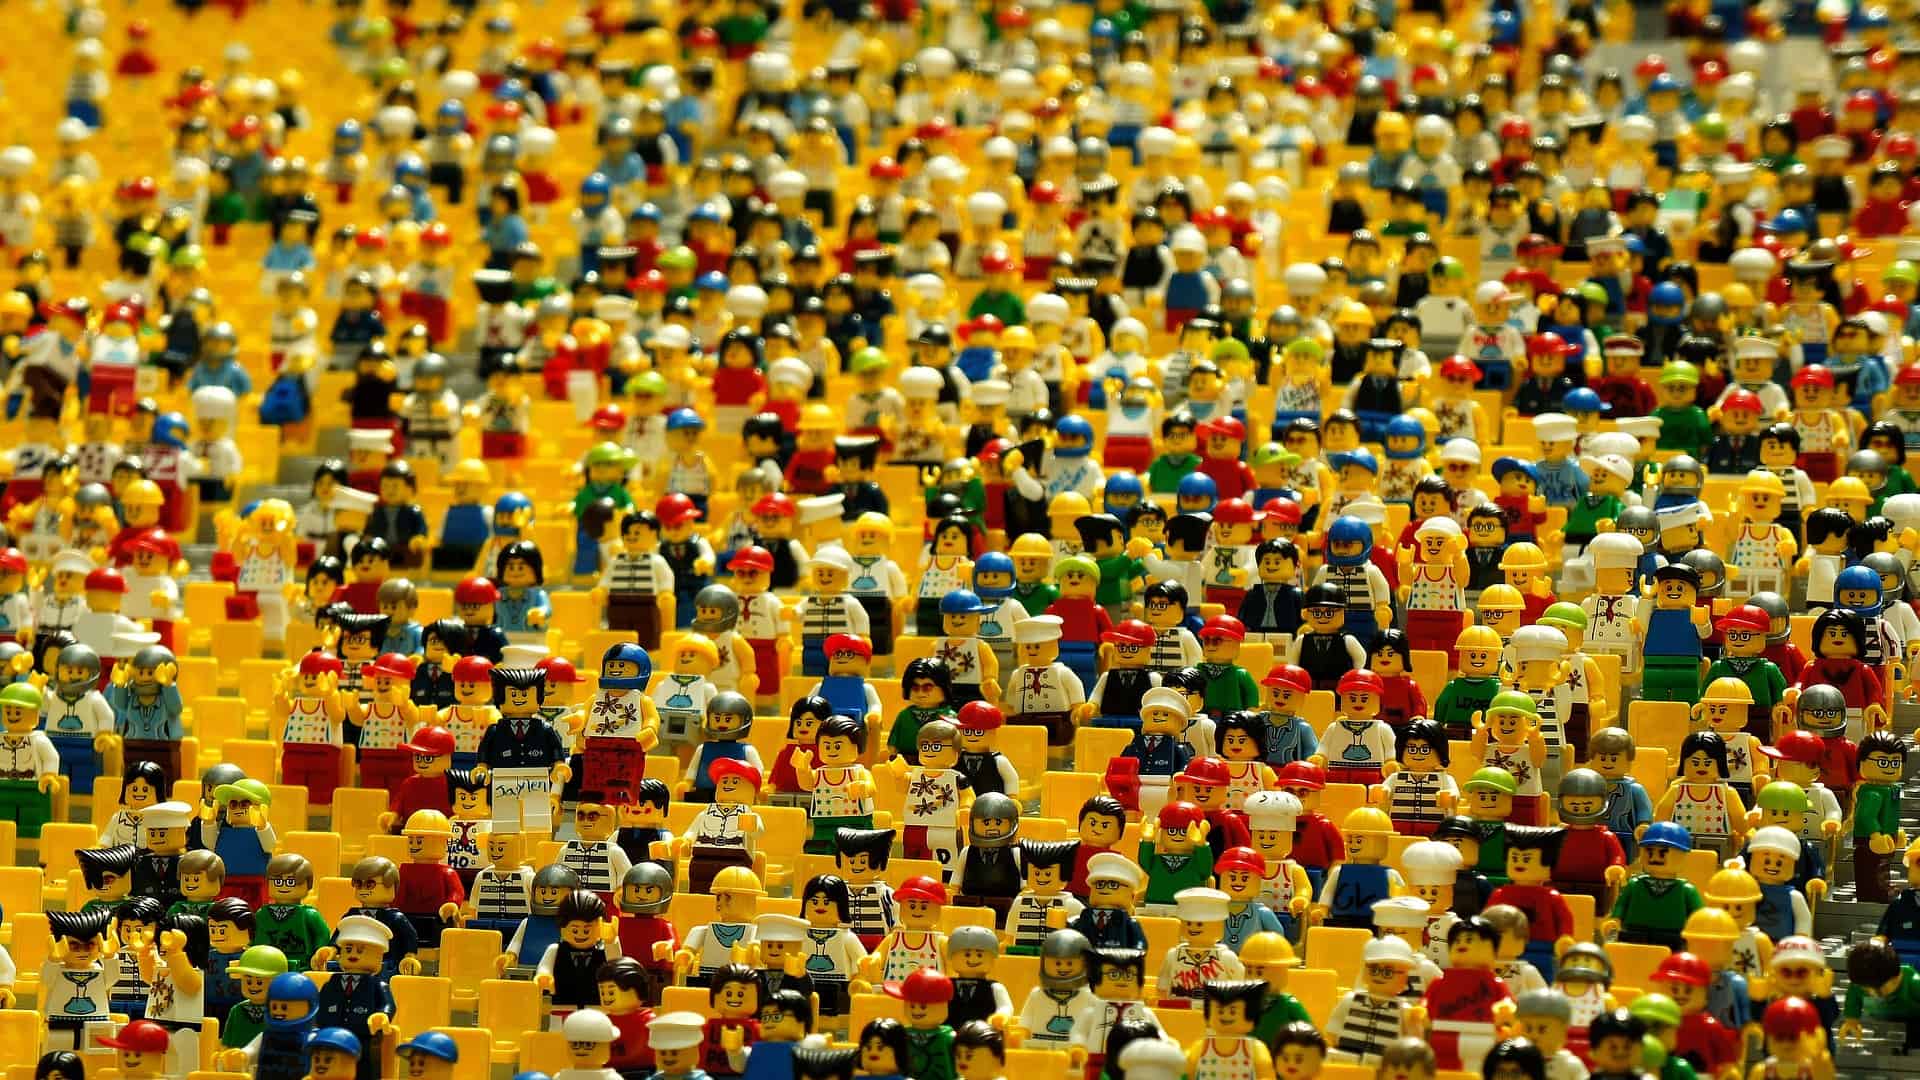 LEGO yellow plastic figurines are all made from plastic